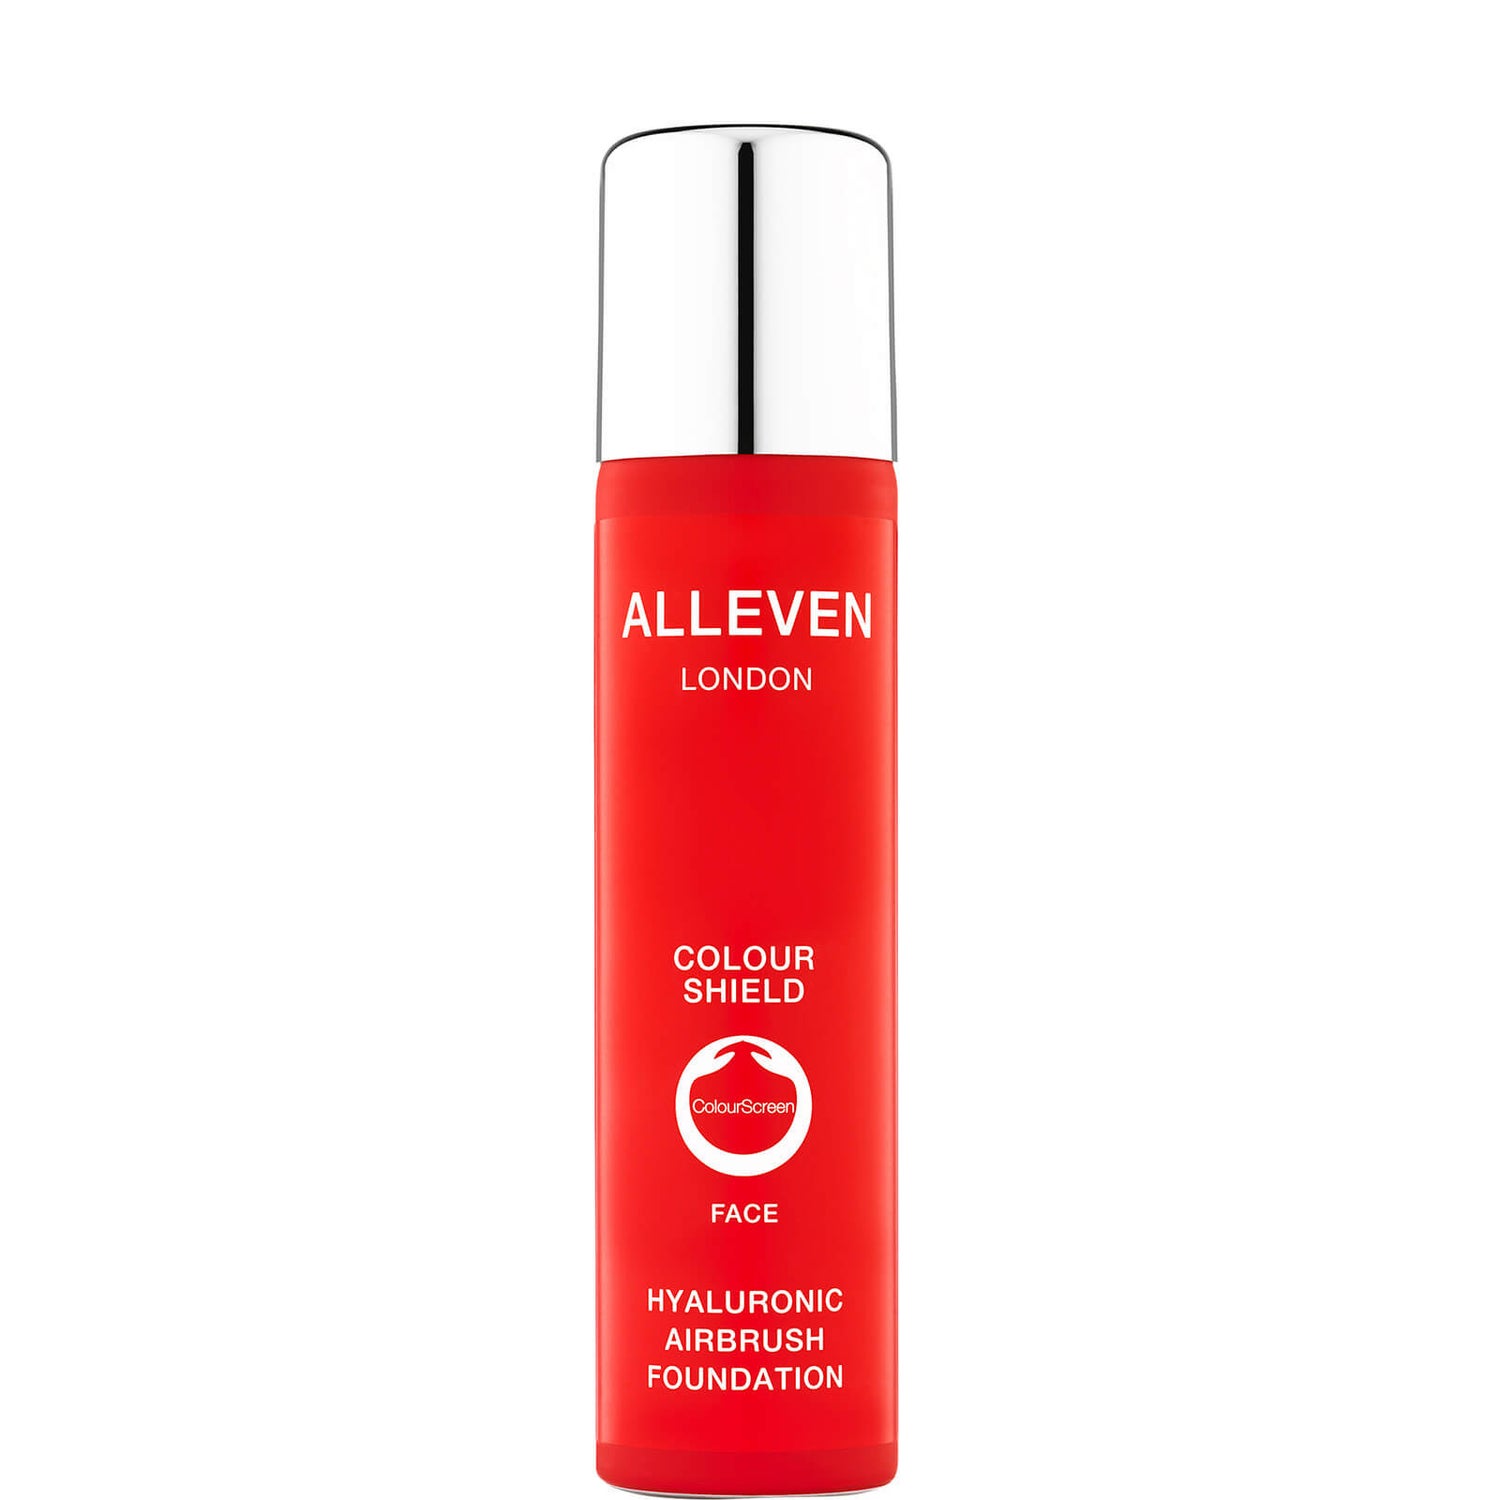 ALLEVEN Colour Shield Face - Hyaluronic Airbrush Foundation